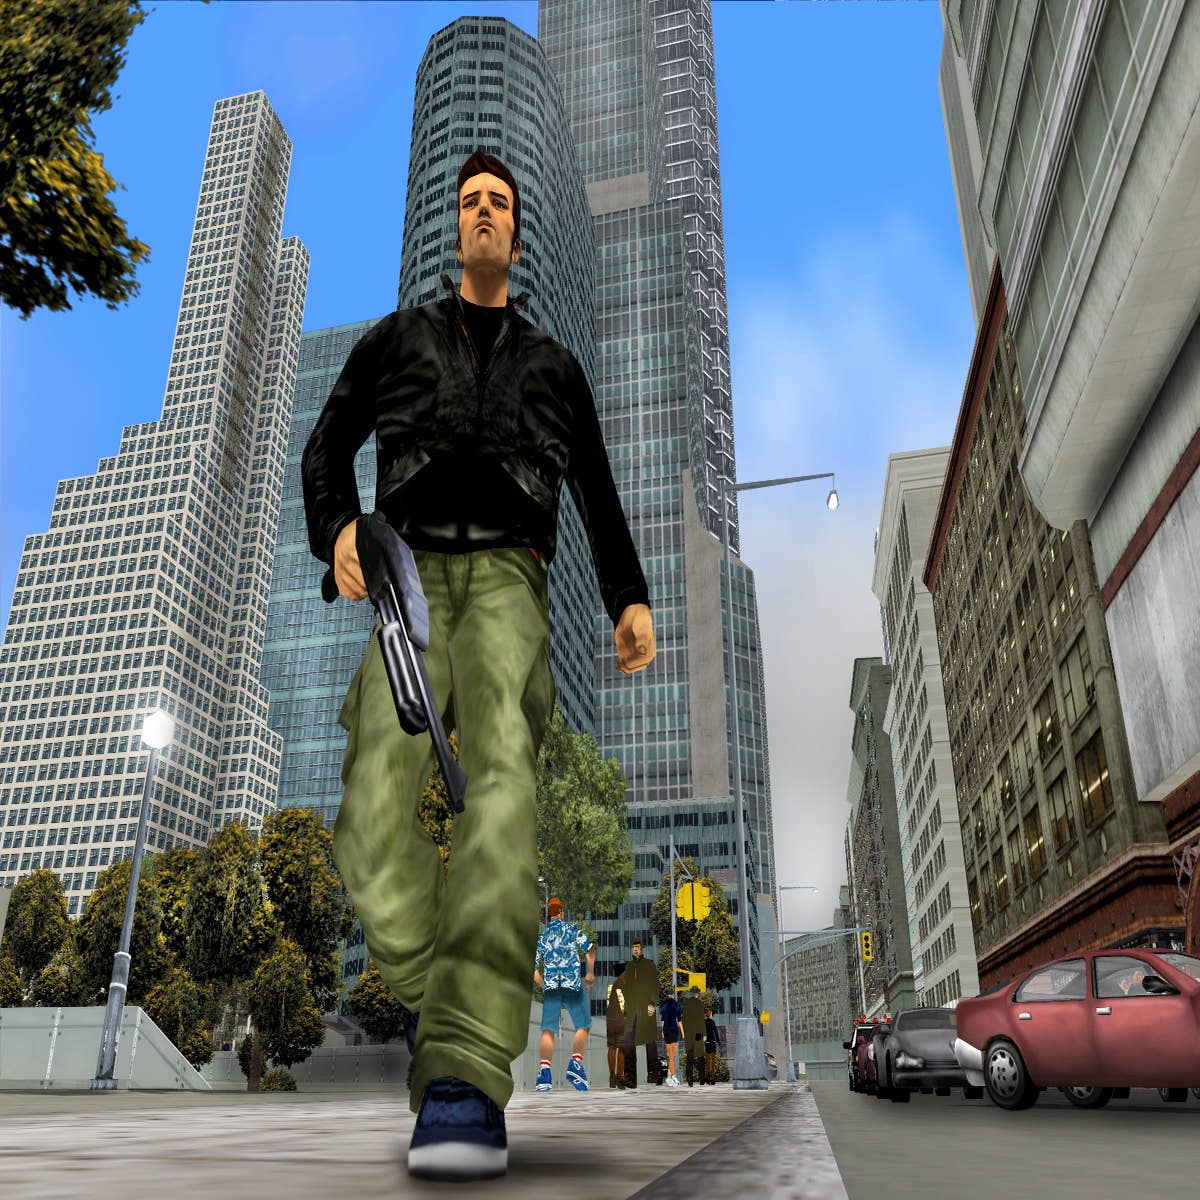 Grand Theft Auto III: How the Title Changed Gaming